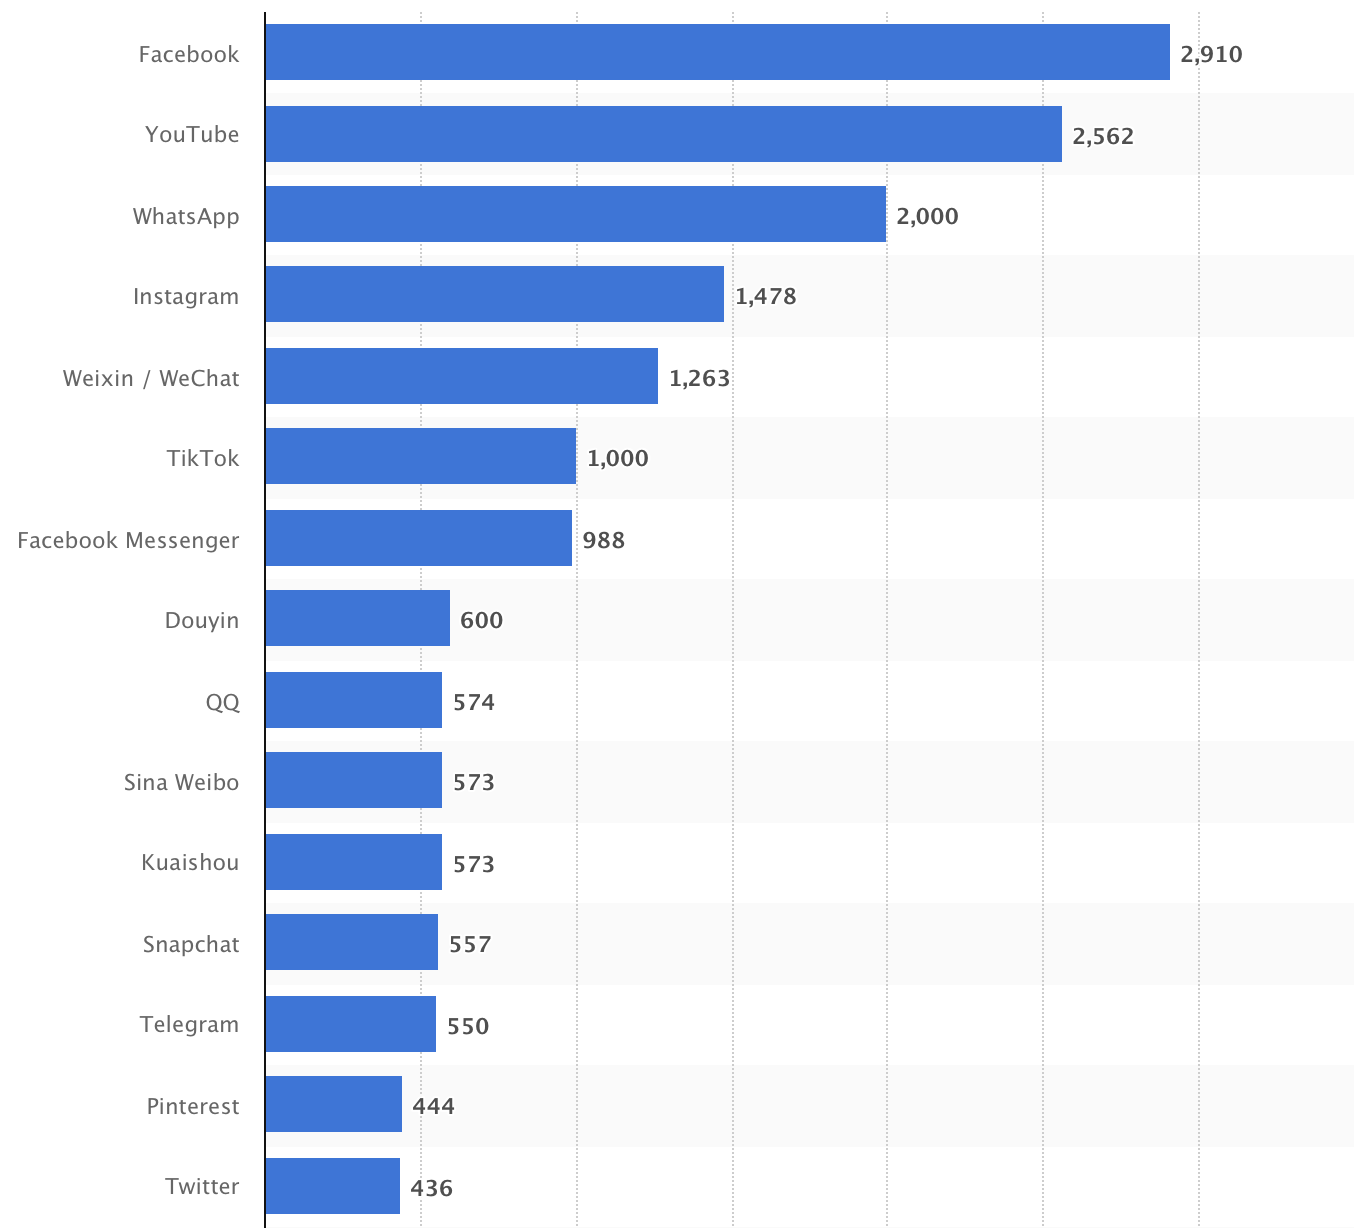 Number of social media active users, in millions. Source - Statista